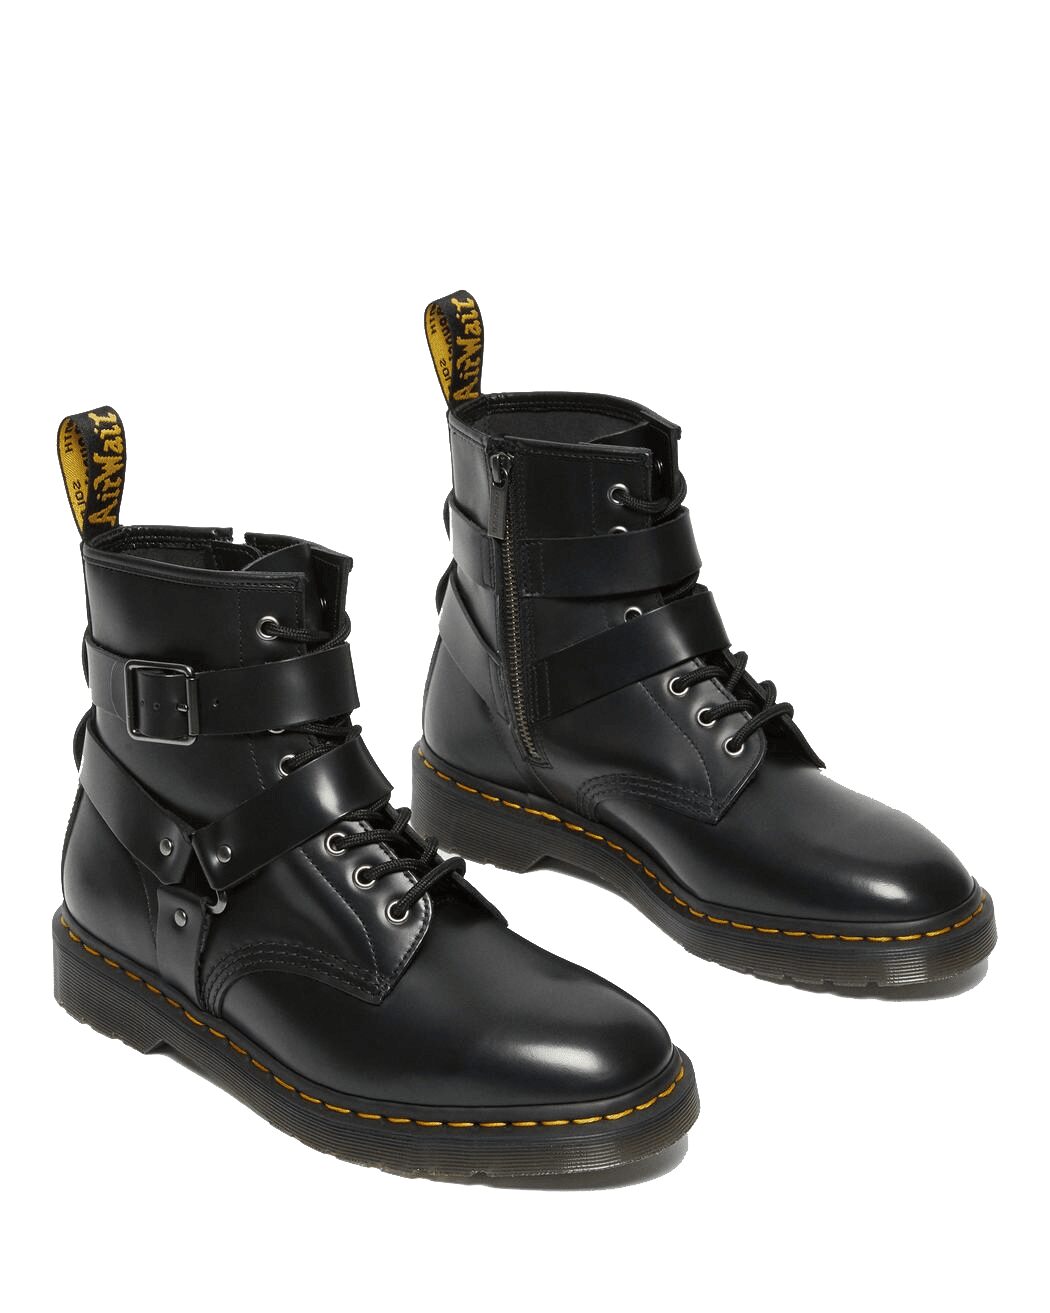 Dr. Martens Leather Harness Lace Up Boots